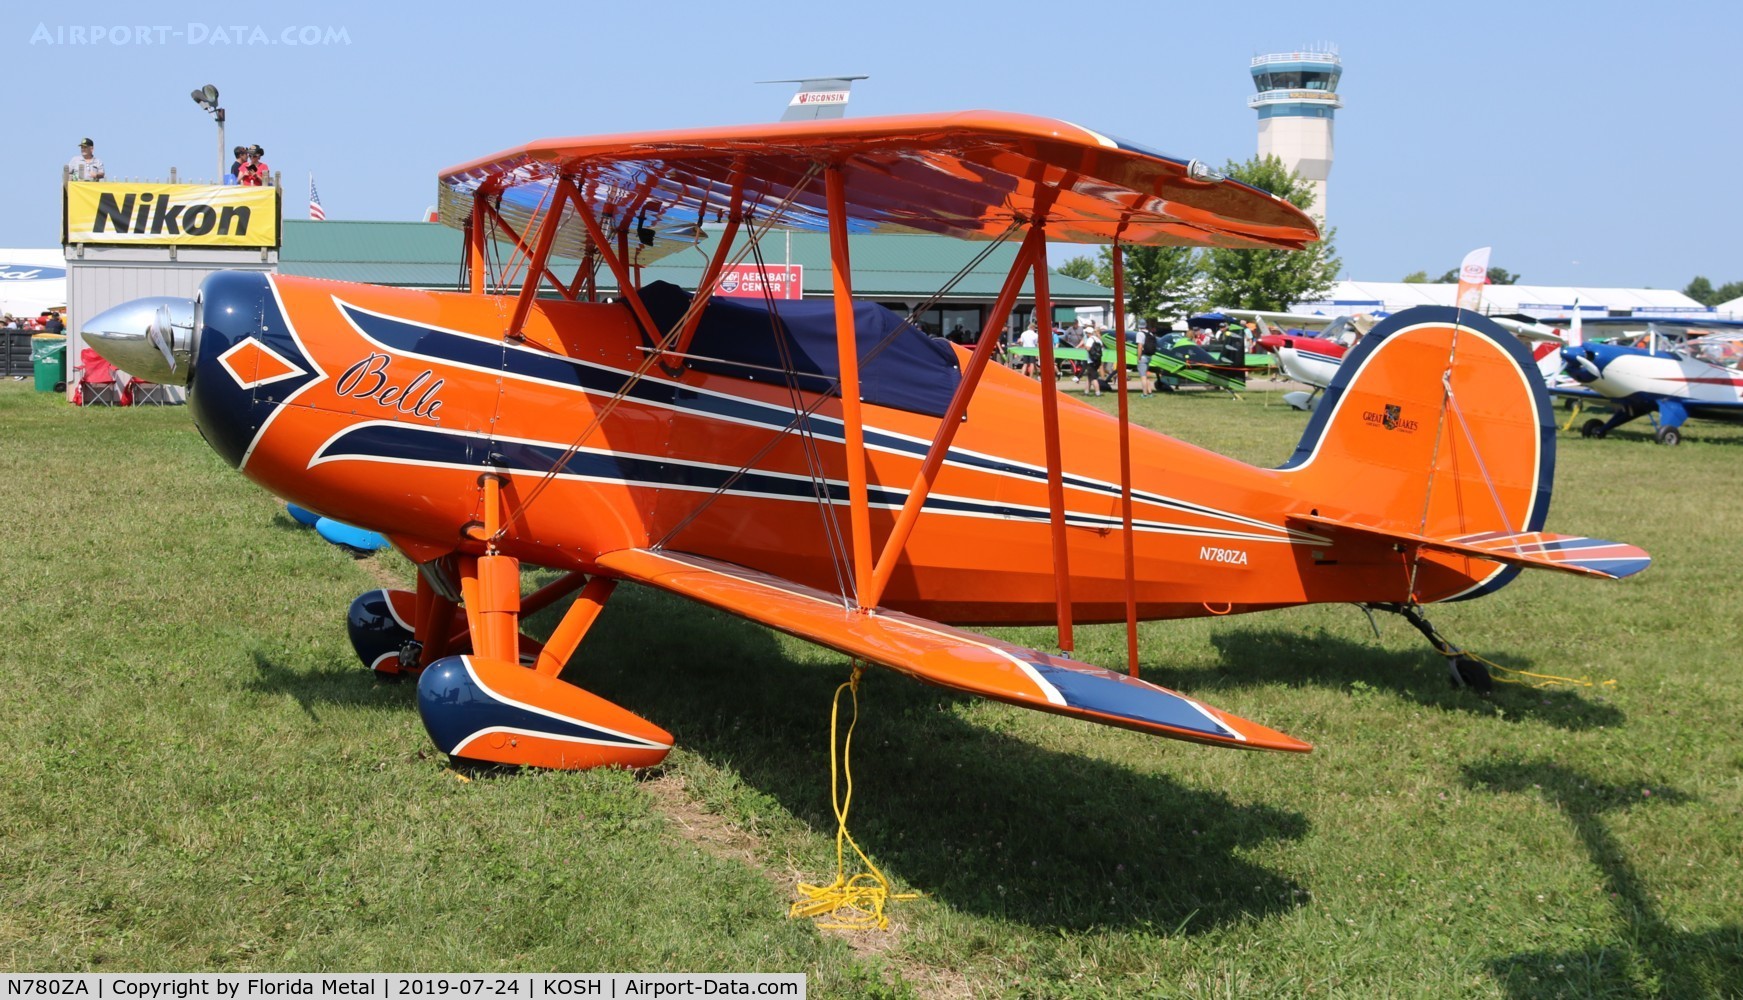 N780ZA, 1975 Great Lakes 2T-1A-2 Sport Trainer C/N 0718, Great Lakes 2T